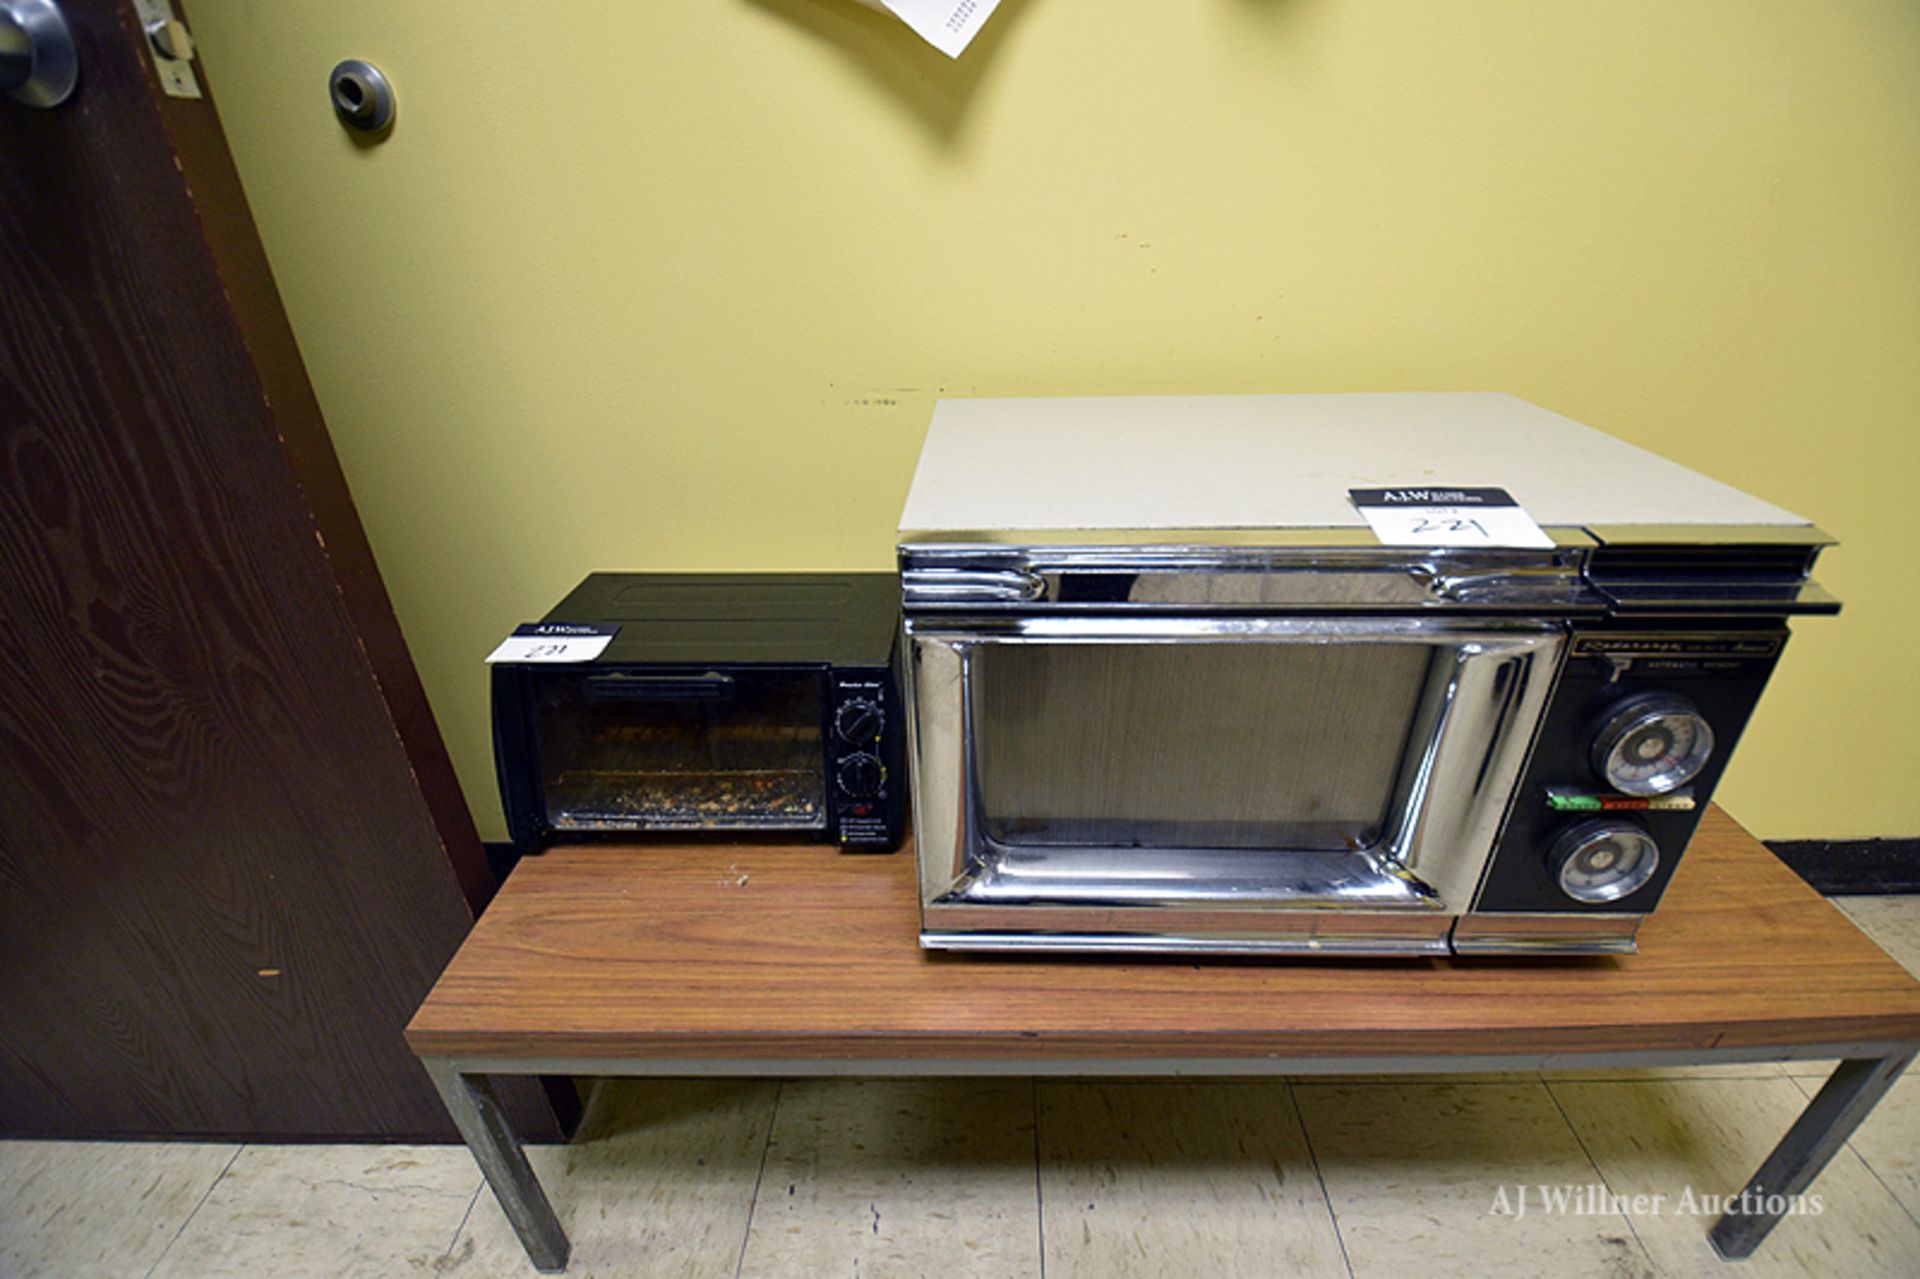 Remaining Contents Of Break Room (Excluding Coffee Maker & Cabinets) - Image 2 of 4